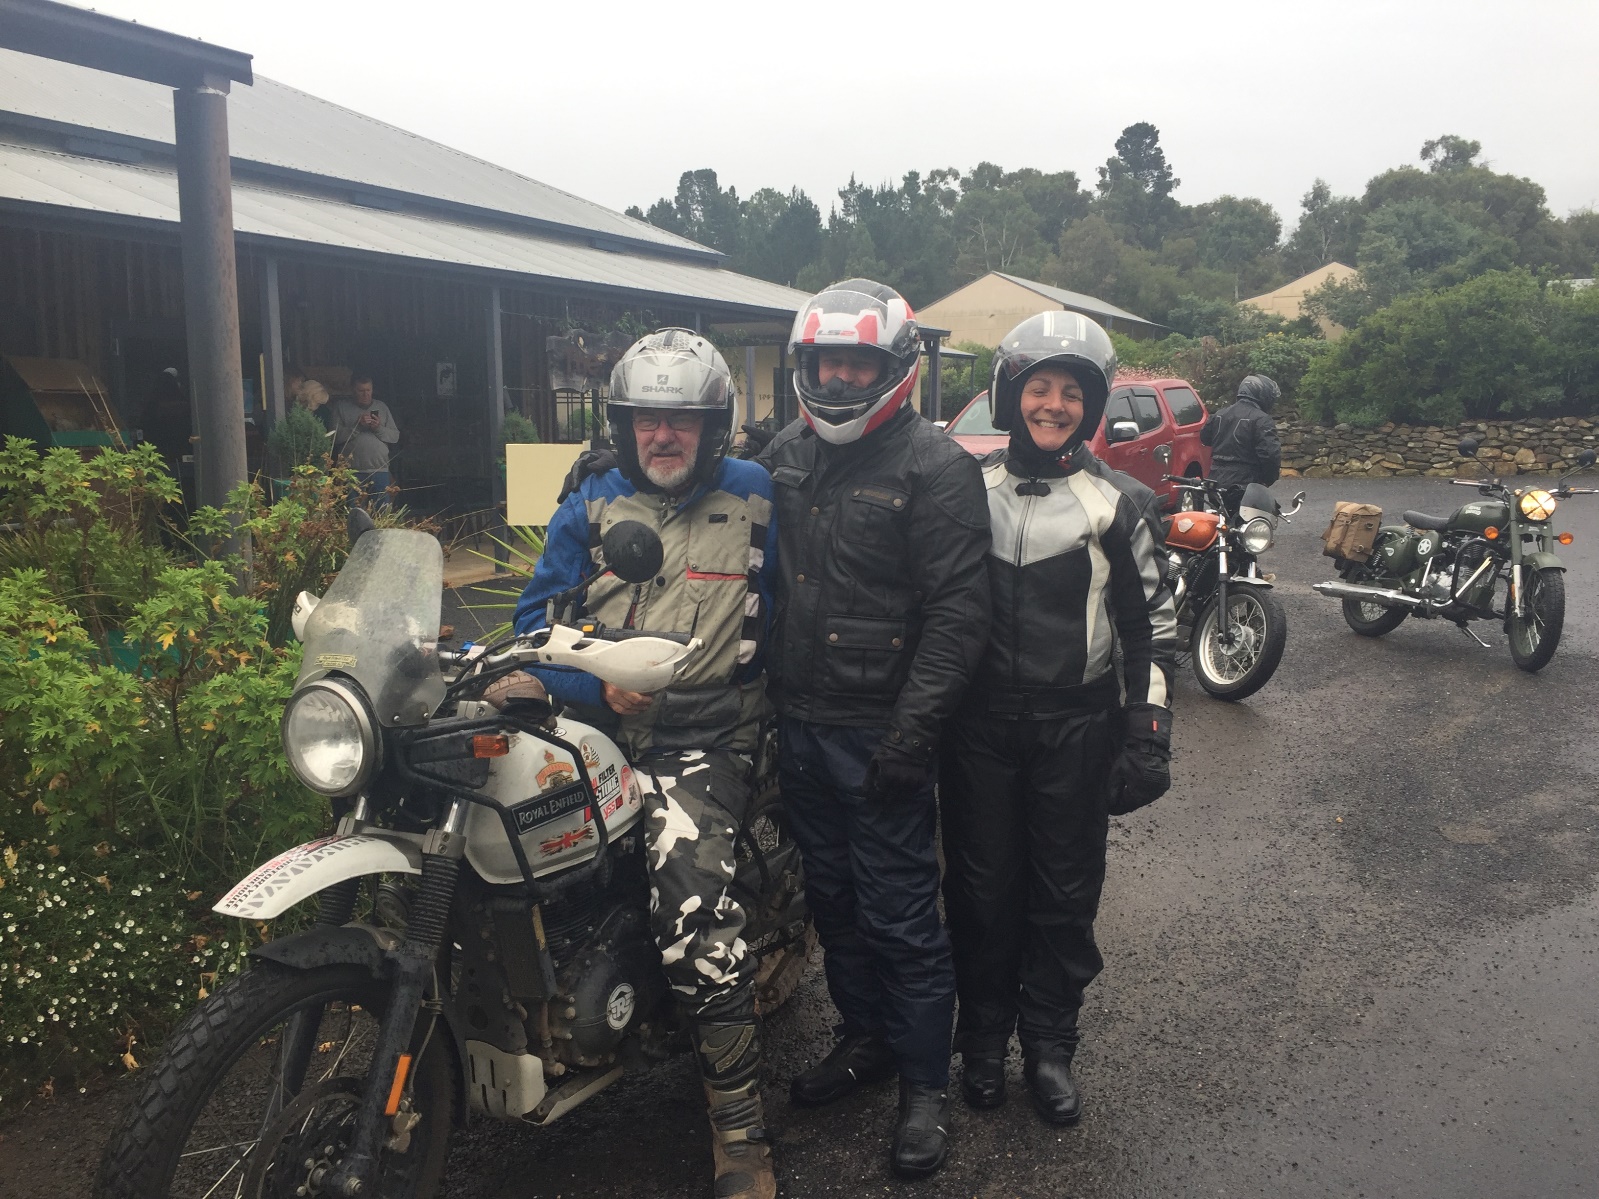 A group of people posing with a motorcycle

Description automatically generated with low confidence